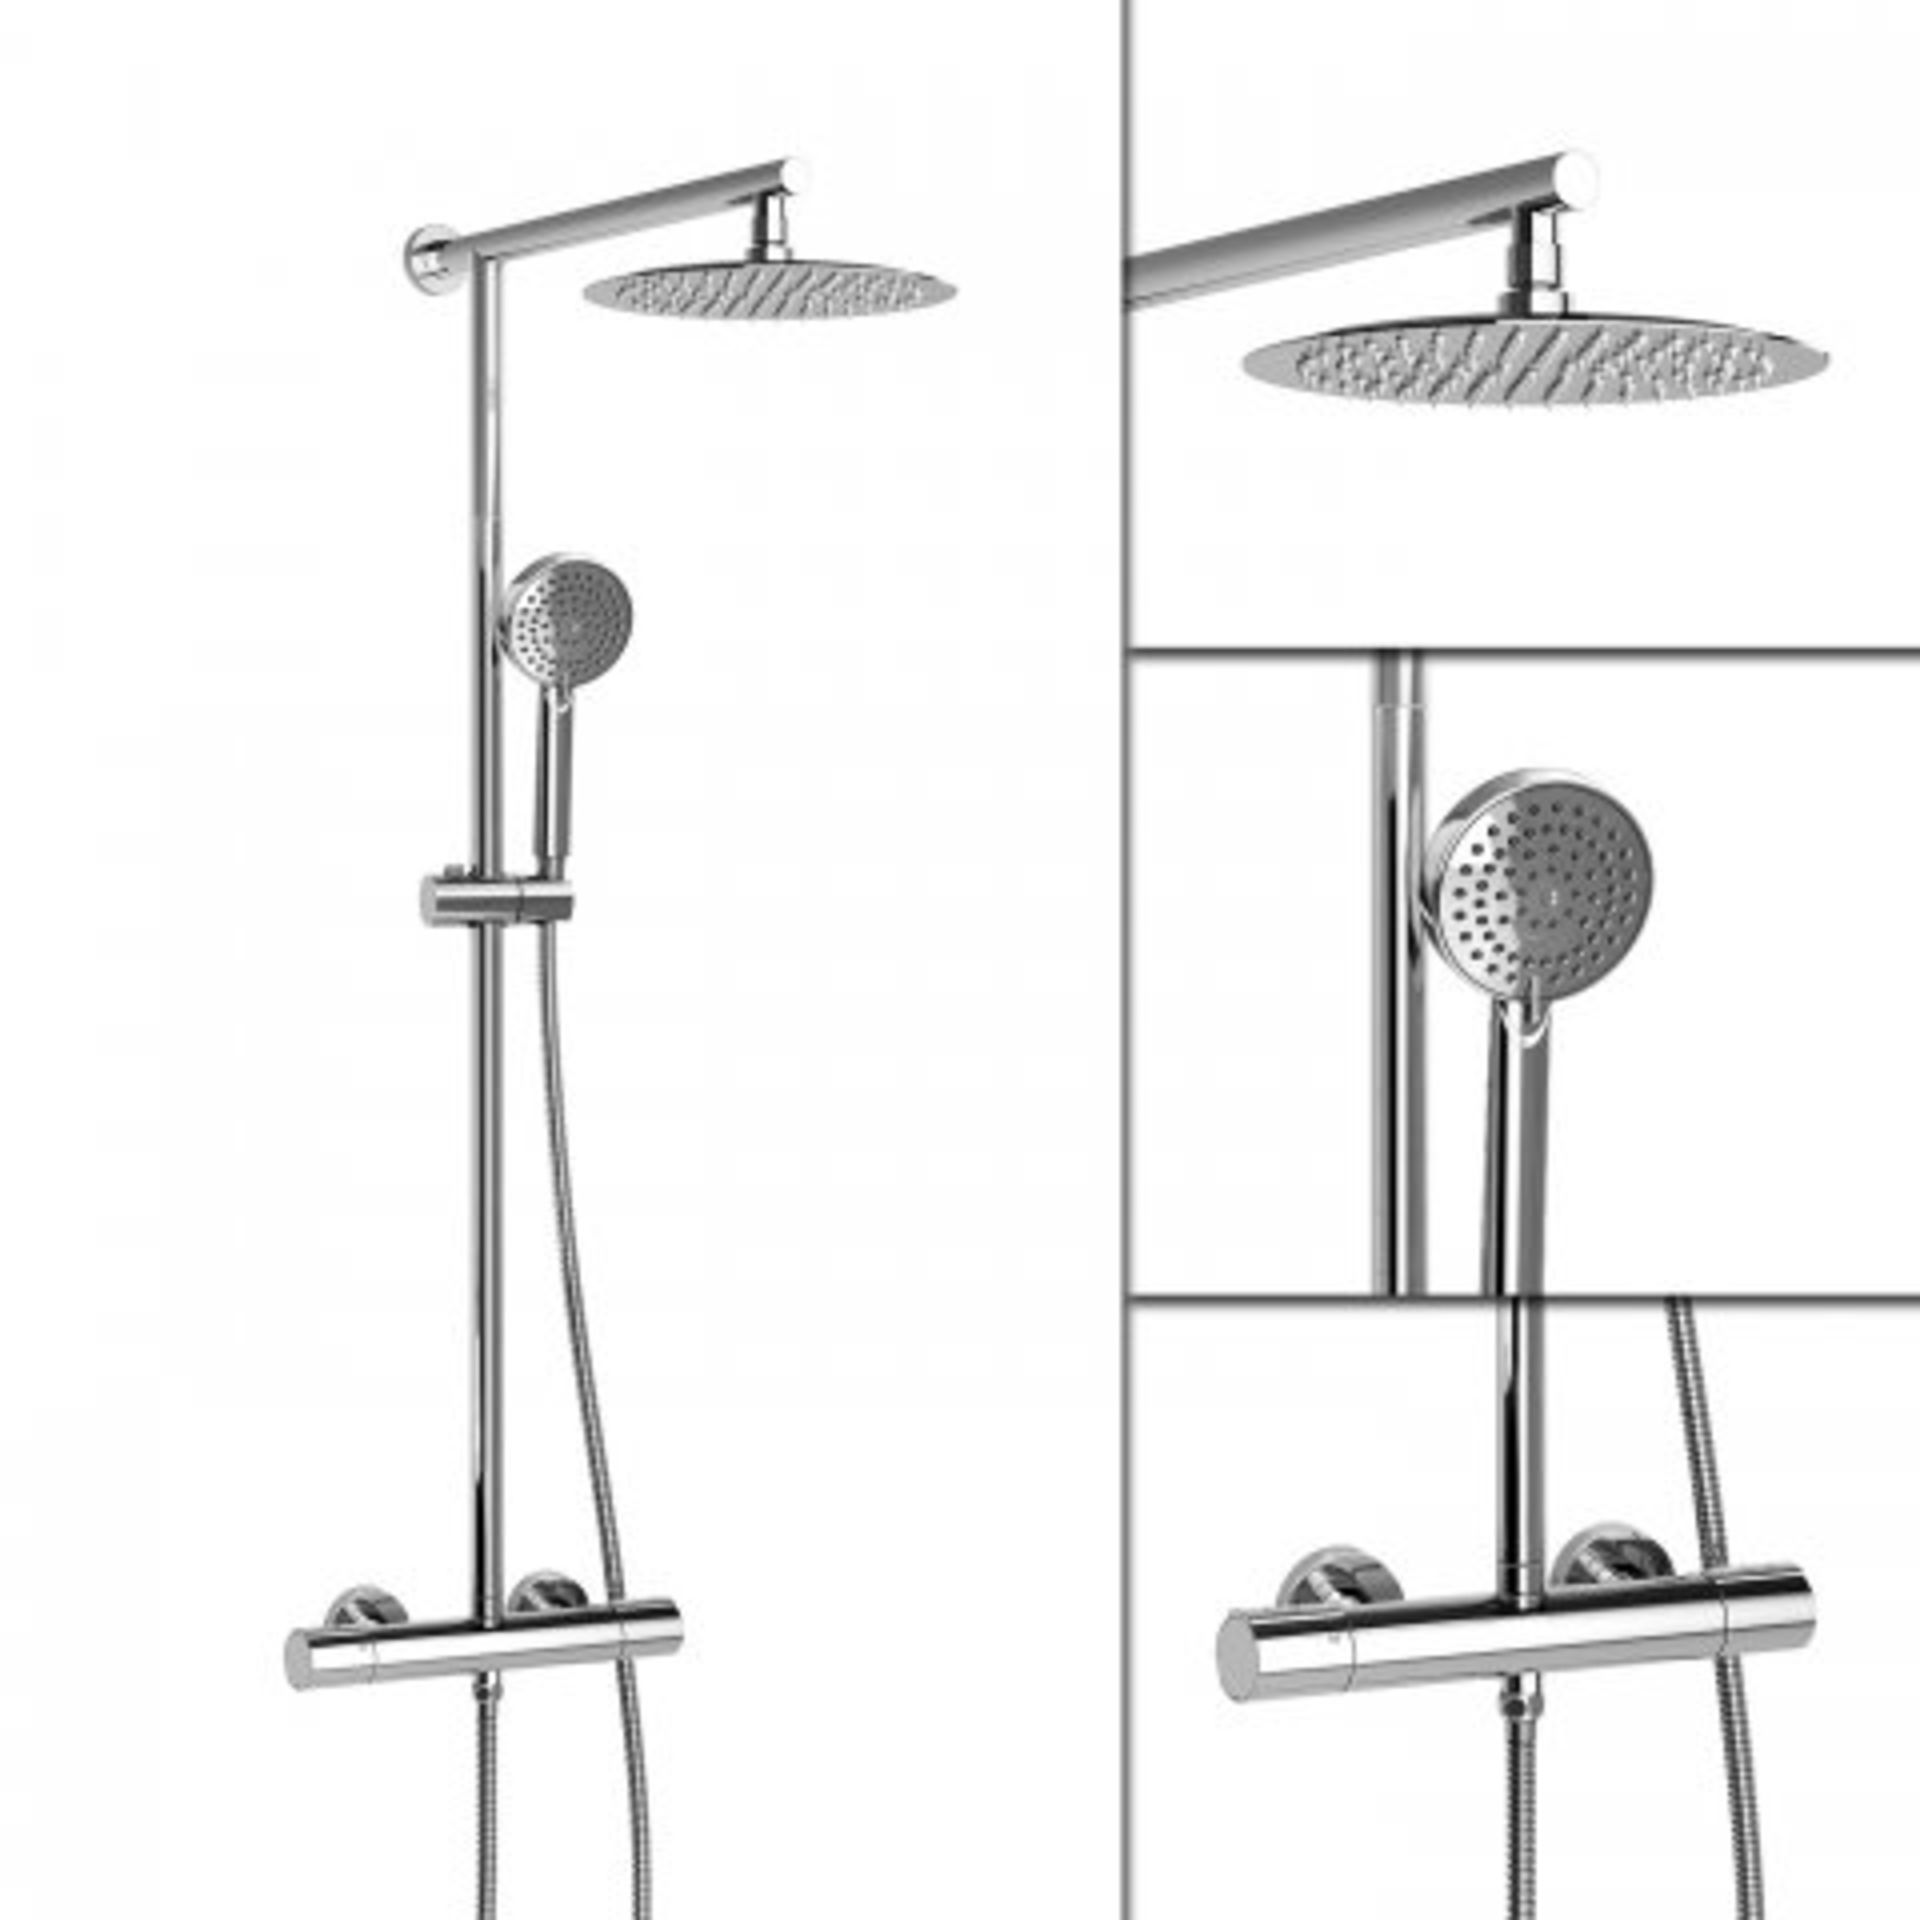 (P42) : 250mm Large Round Head Thermostatic Exposed Shower Kit & Handheld. RRP £299.99. Designer - Image 4 of 5